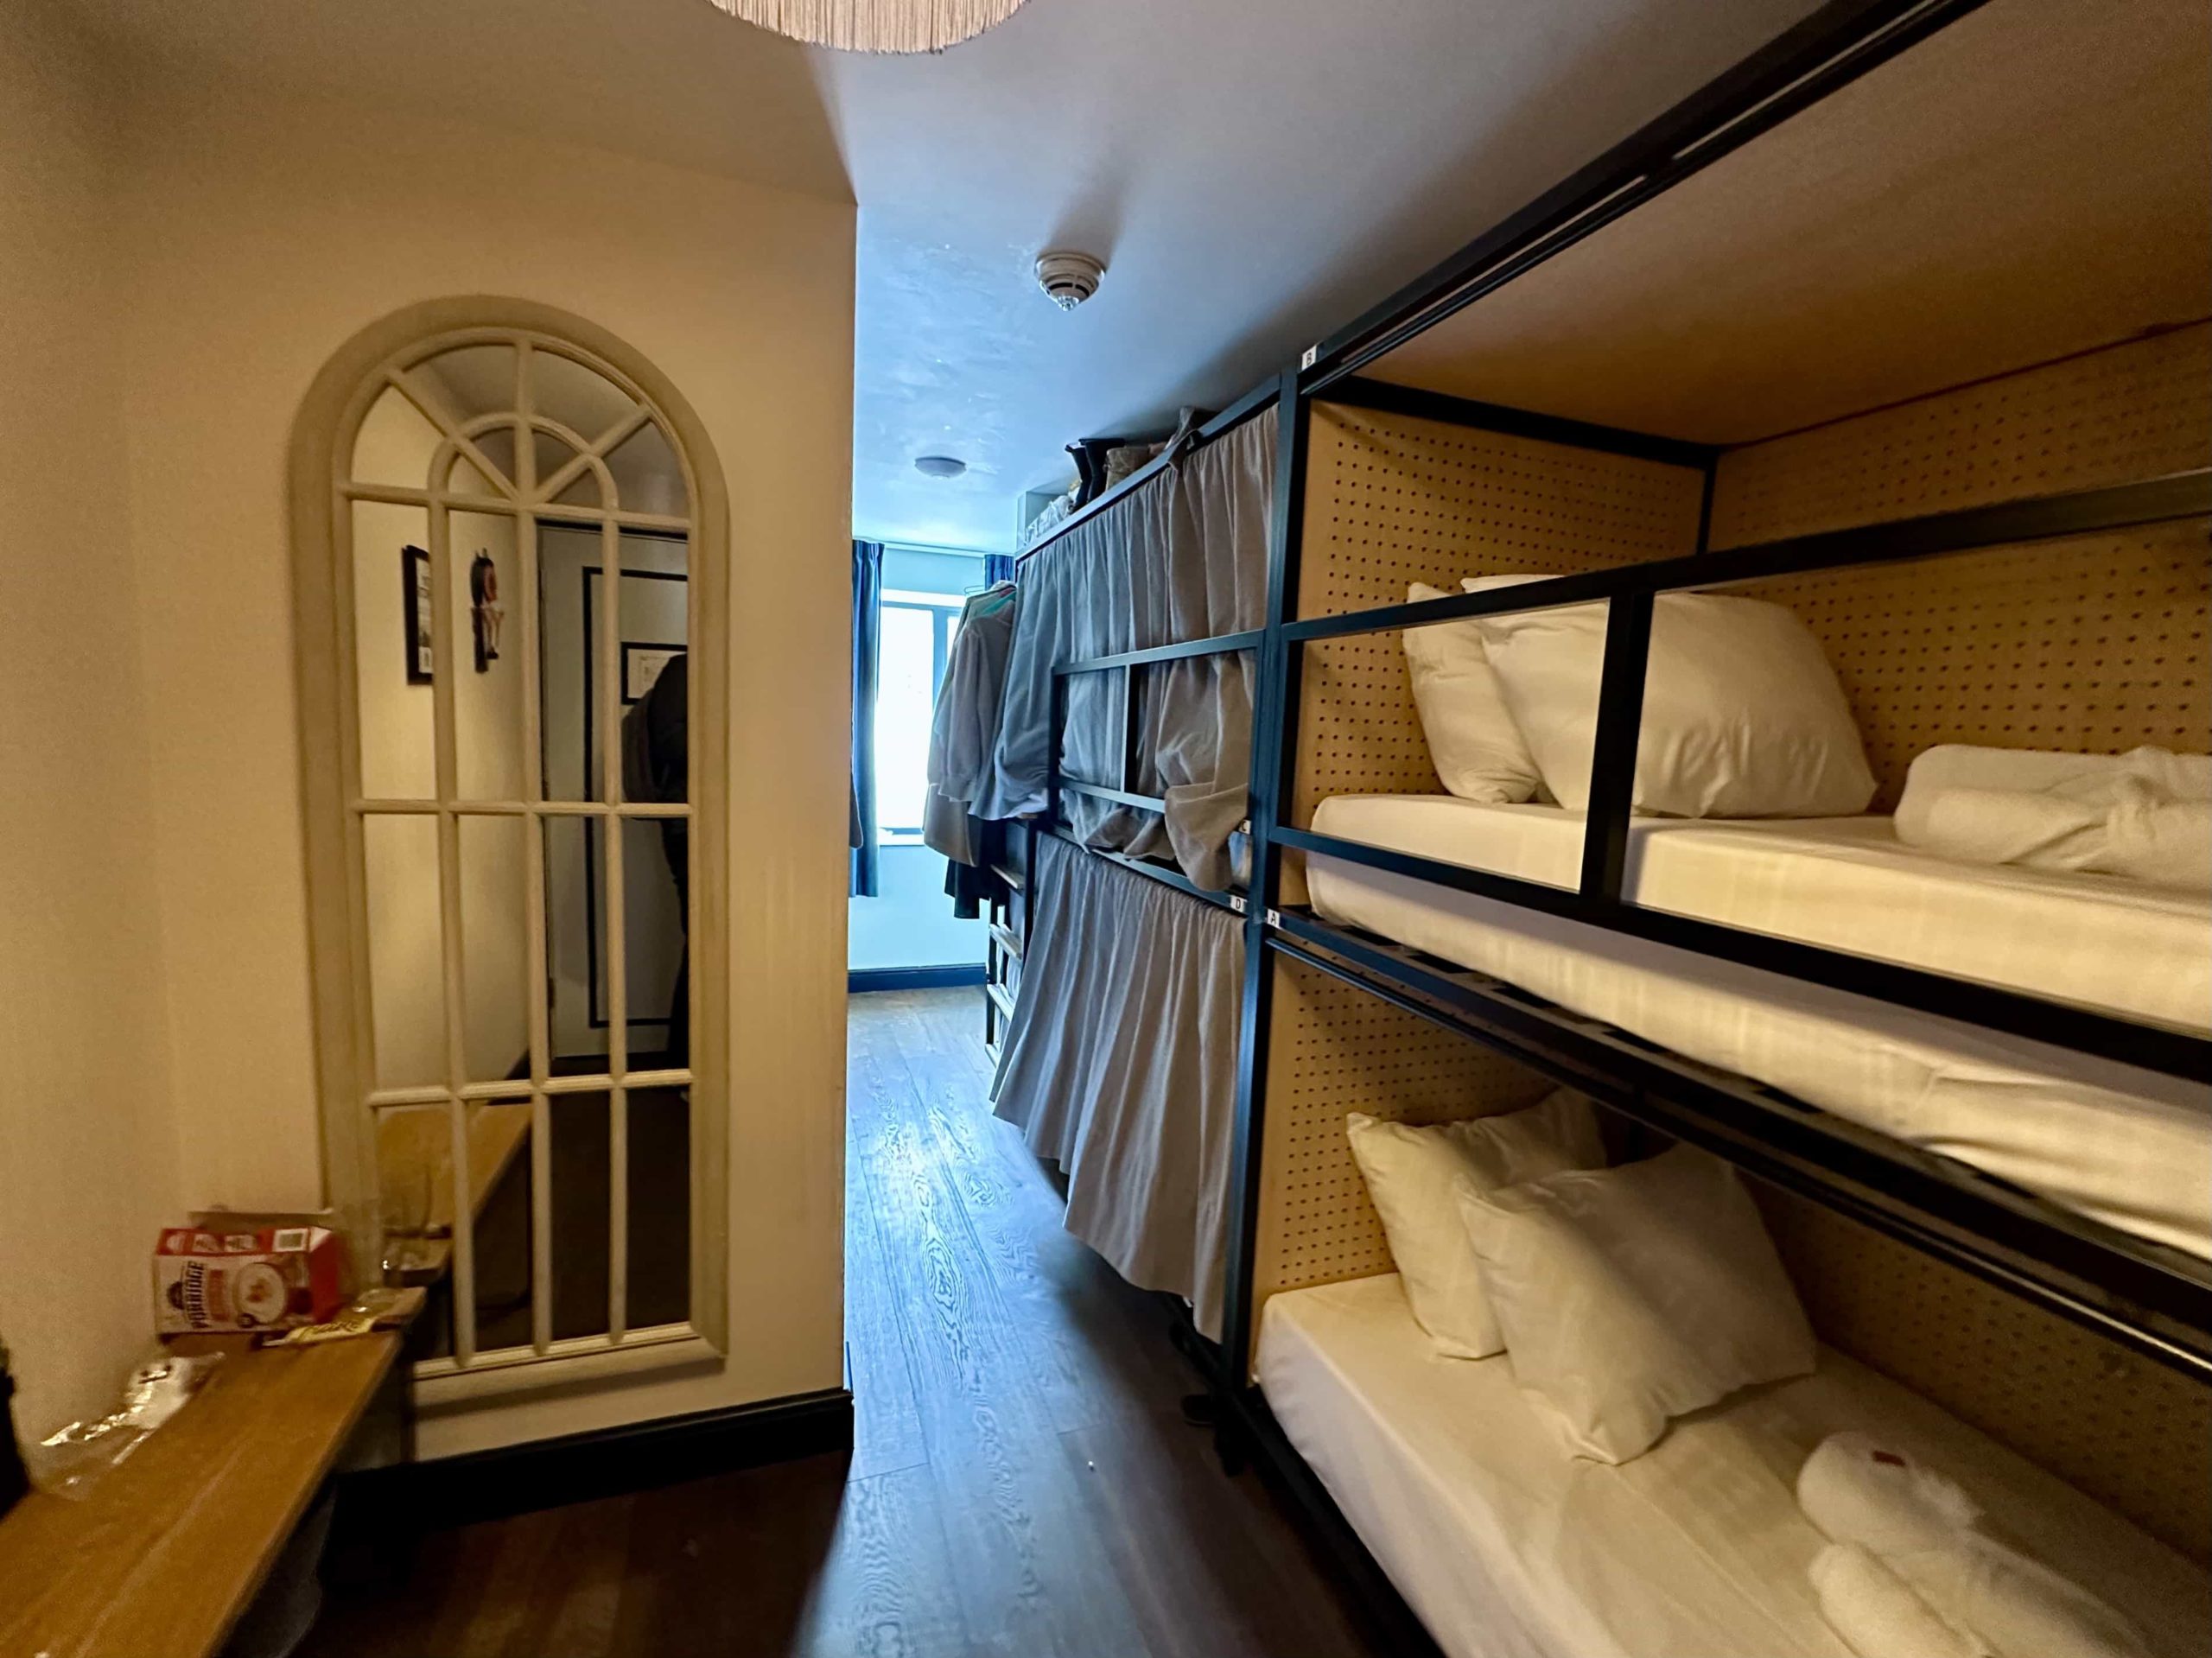 A dorm room with bunkbeds, each with privacy curtains